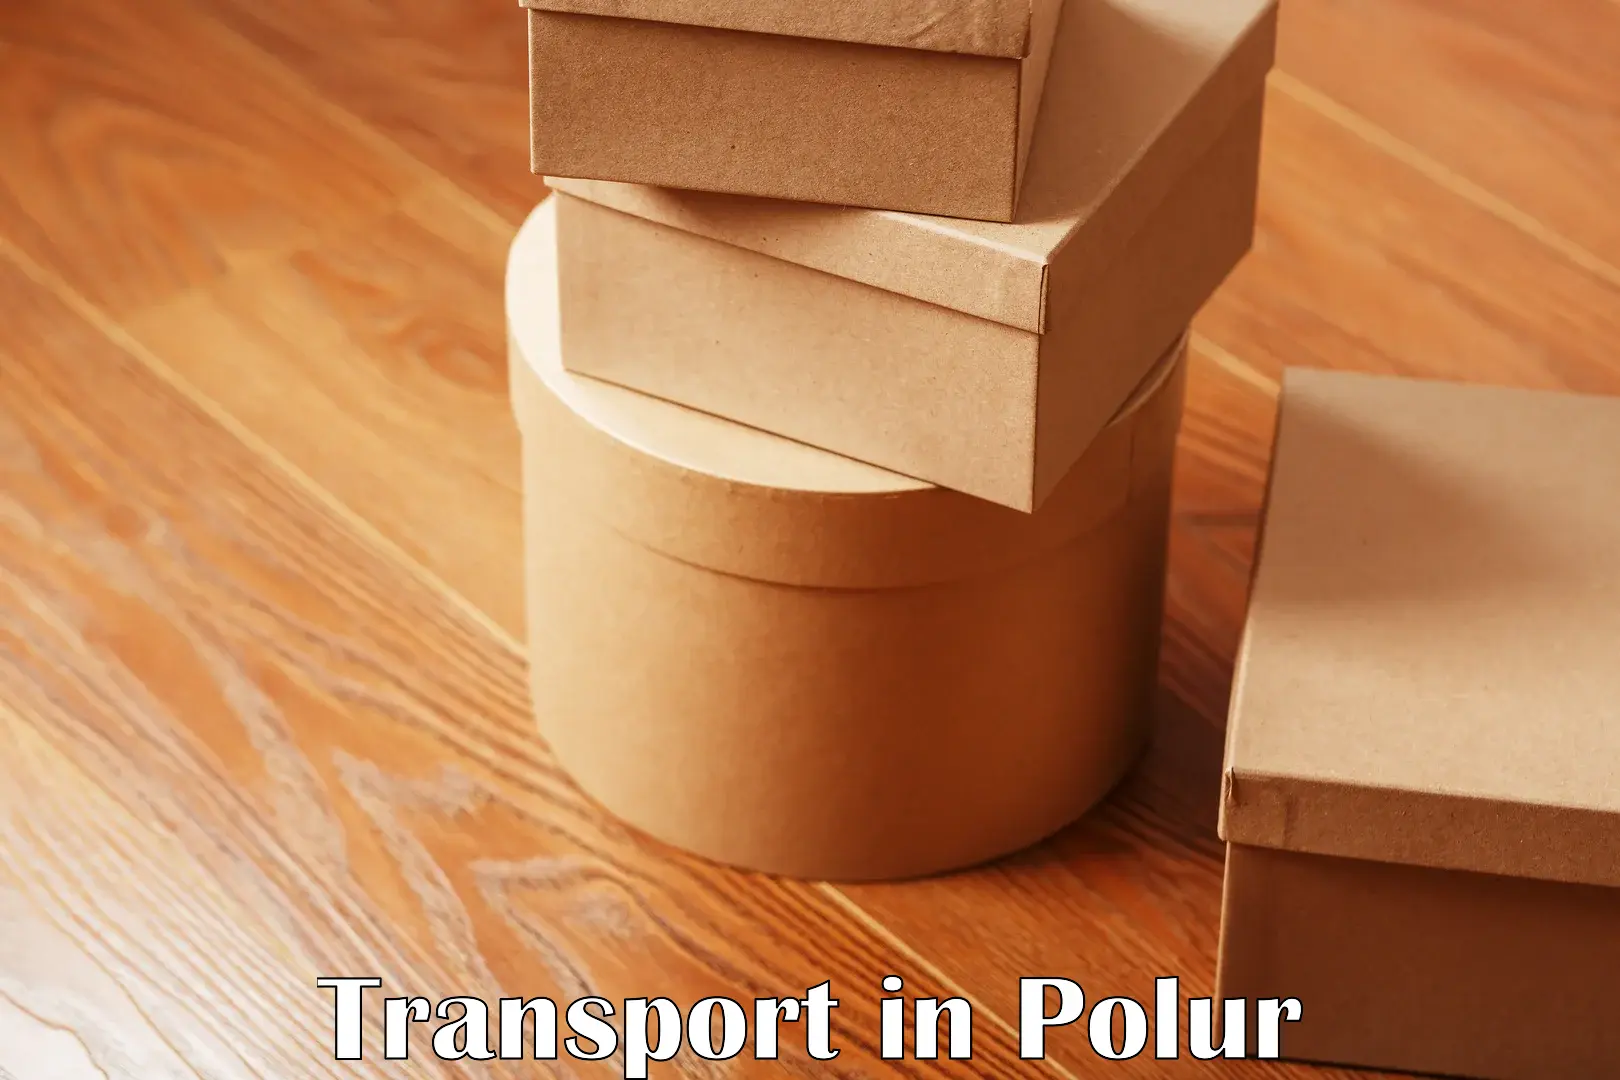 Daily parcel service transport in Polur